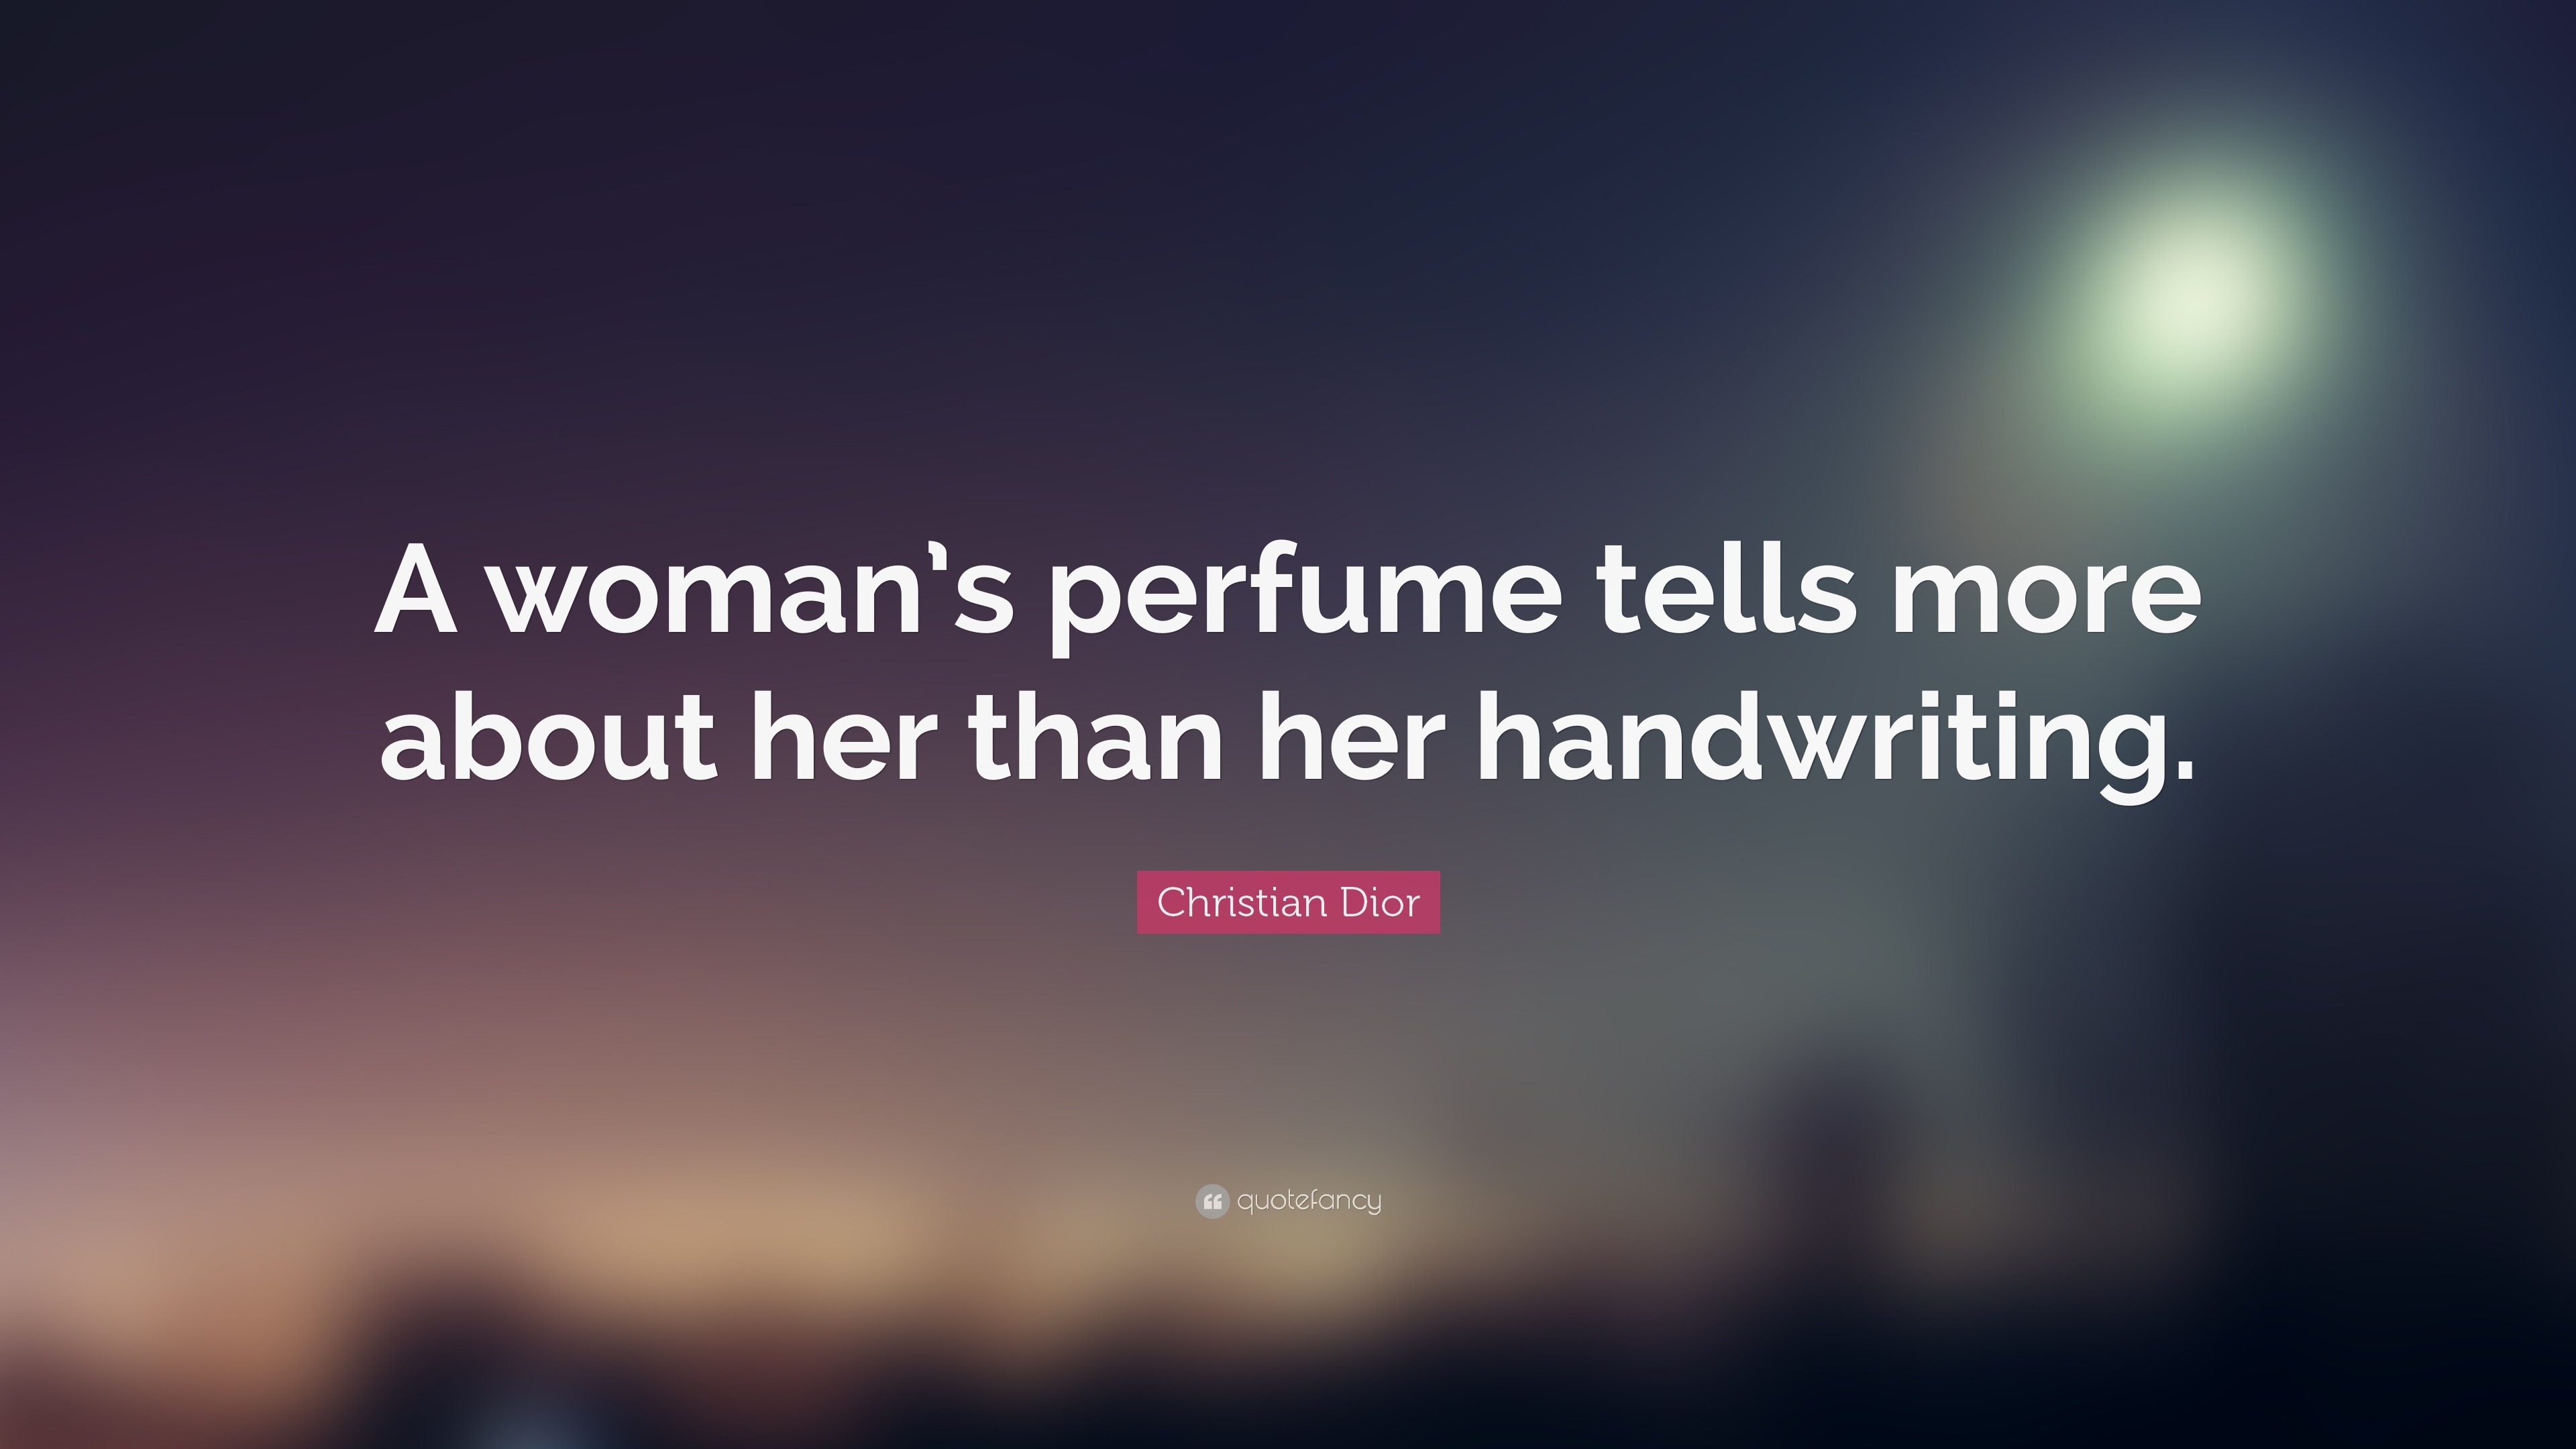 Christian Dior Quote: “A woman's perfume tells more about her than